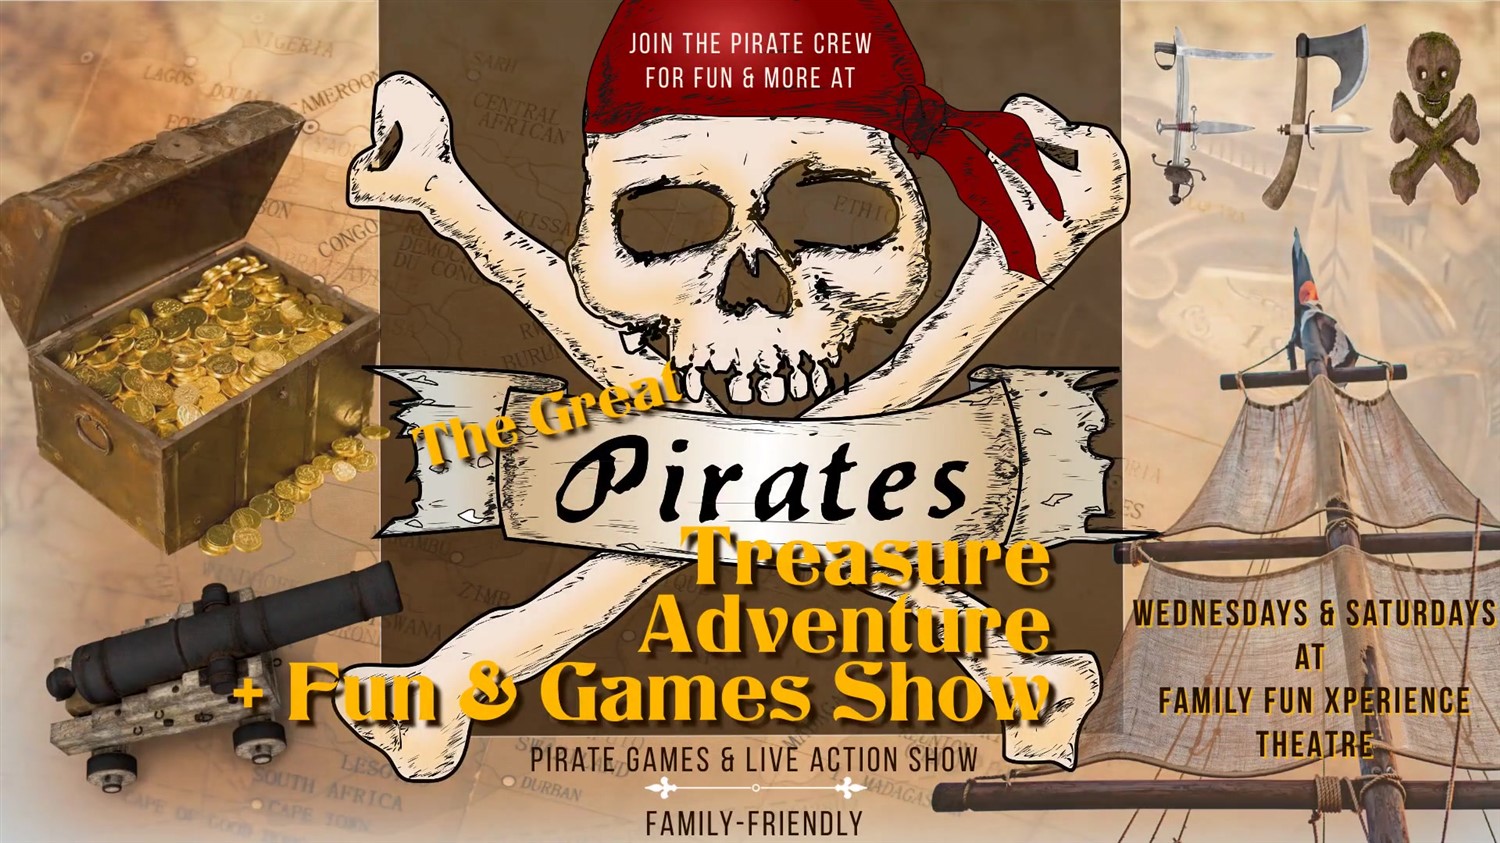 PIRATE TREASURE ADVENTURE SHOW Fun for all ages...aaarrrgh! on Oct 08, 19:00@FFX Theatre - Pick a seat, Buy tickets and Get information on Family Fun Xperience tickets.ffxshow.org